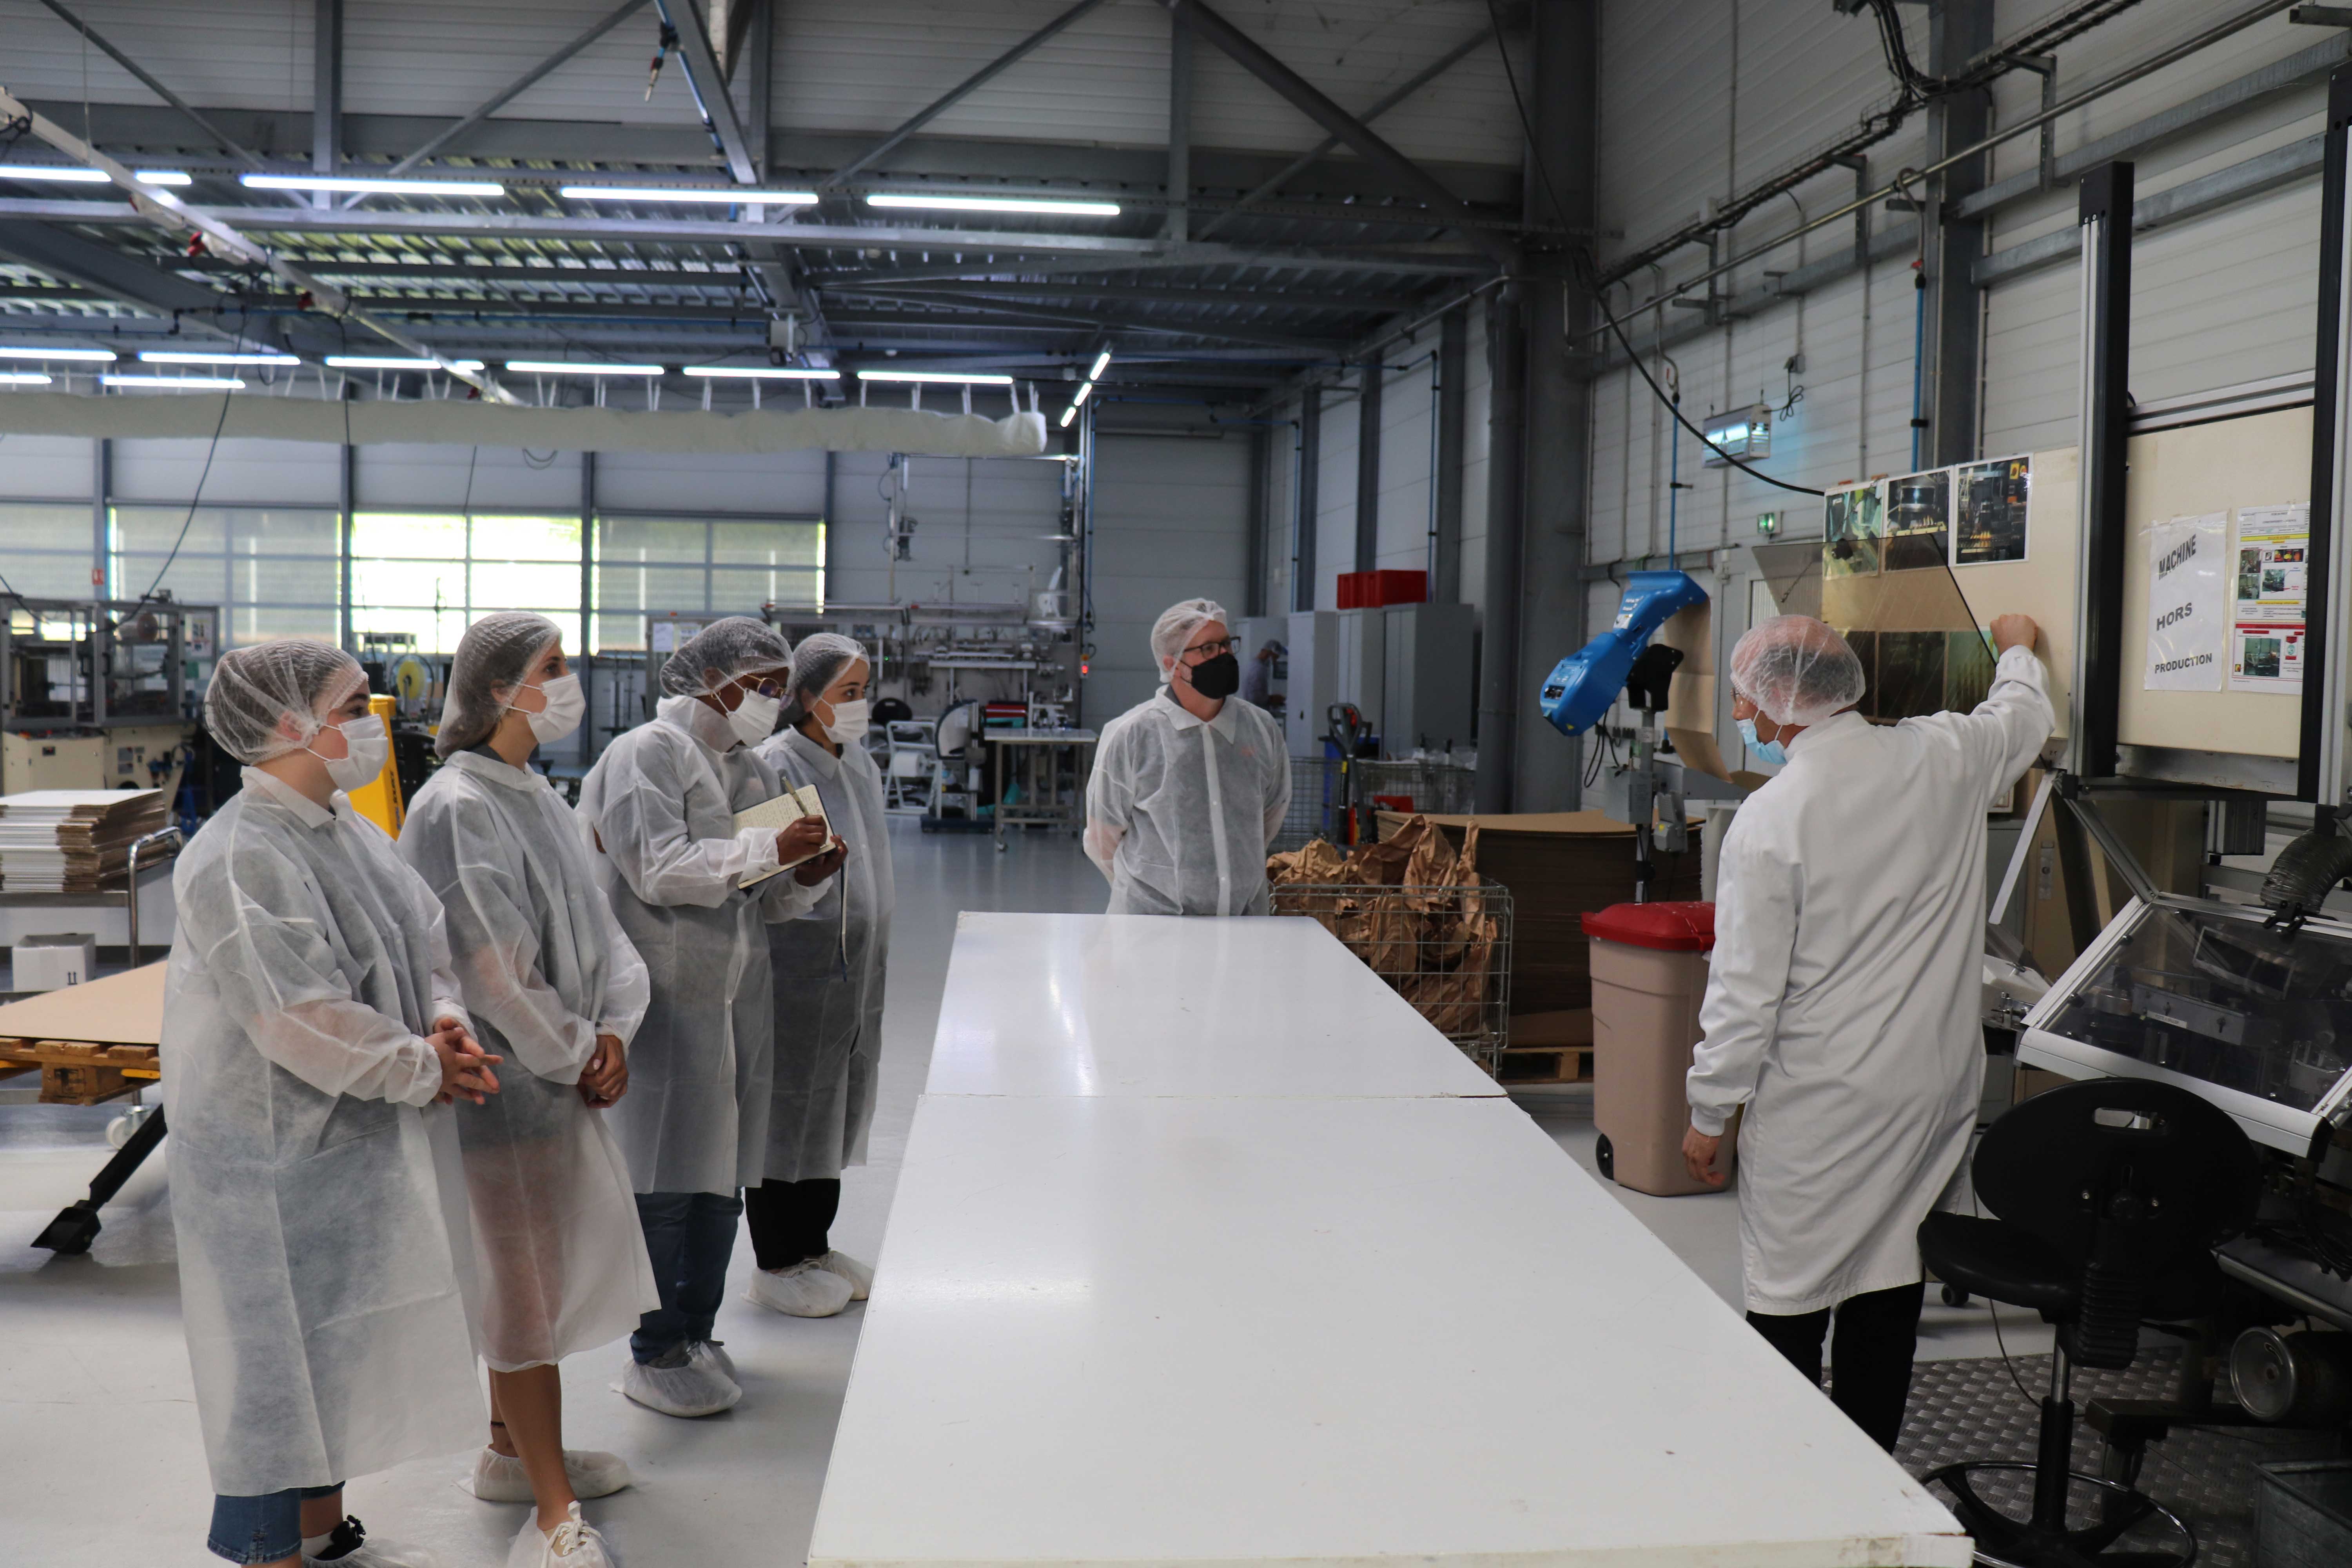 The group visits Sothys International, a luxury spa brand based in Brive, France.